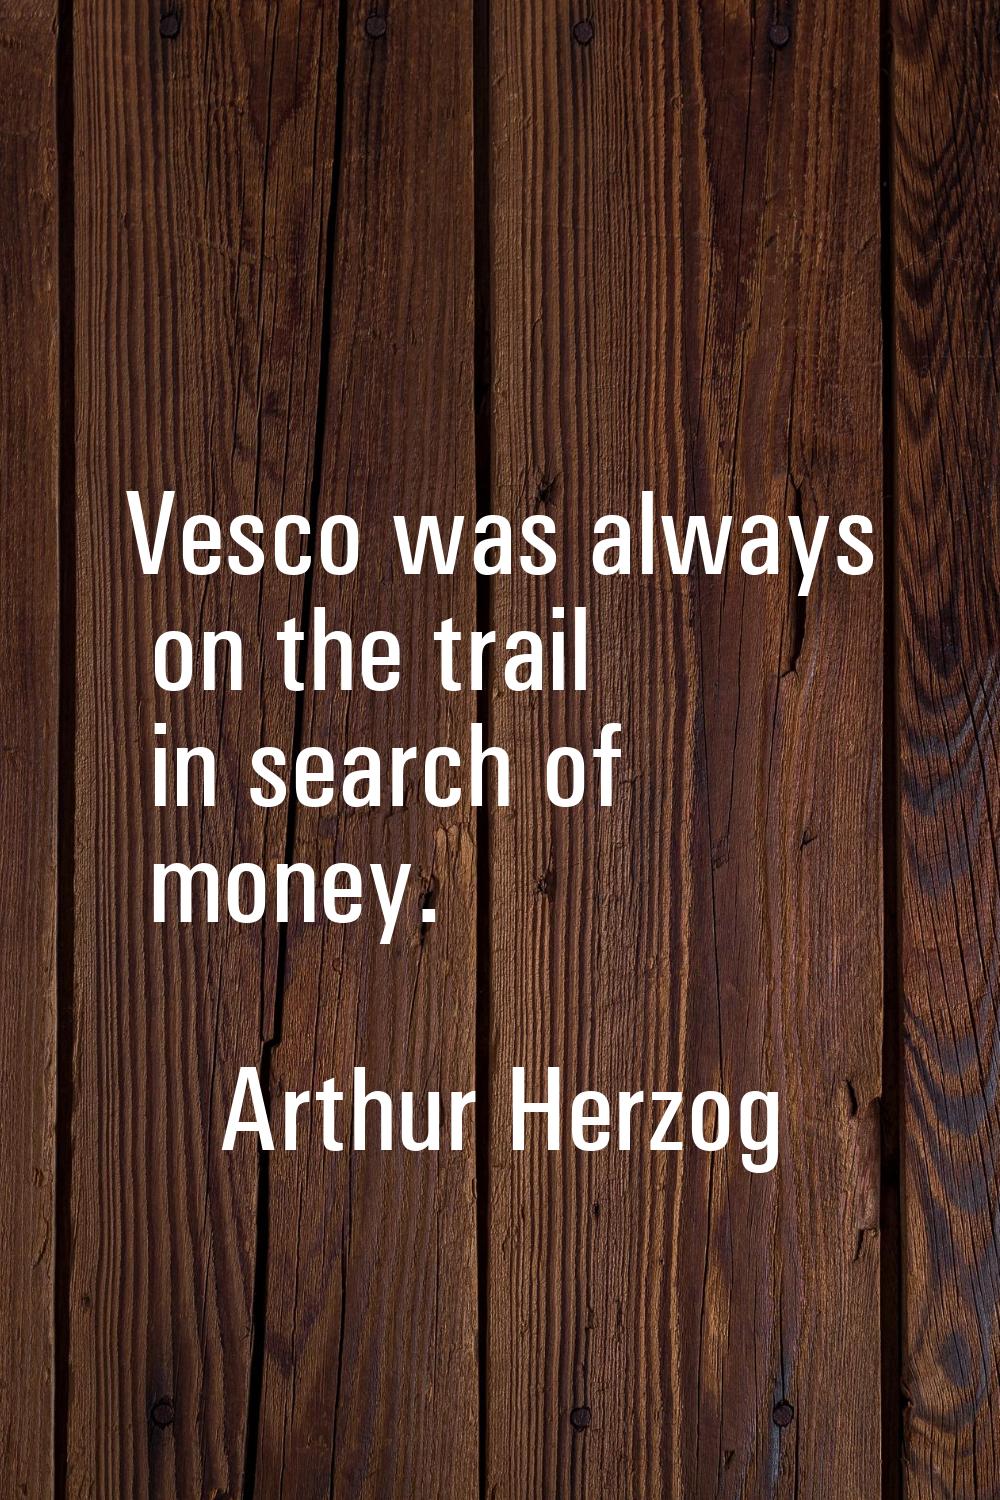 Vesco was always on the trail in search of money.